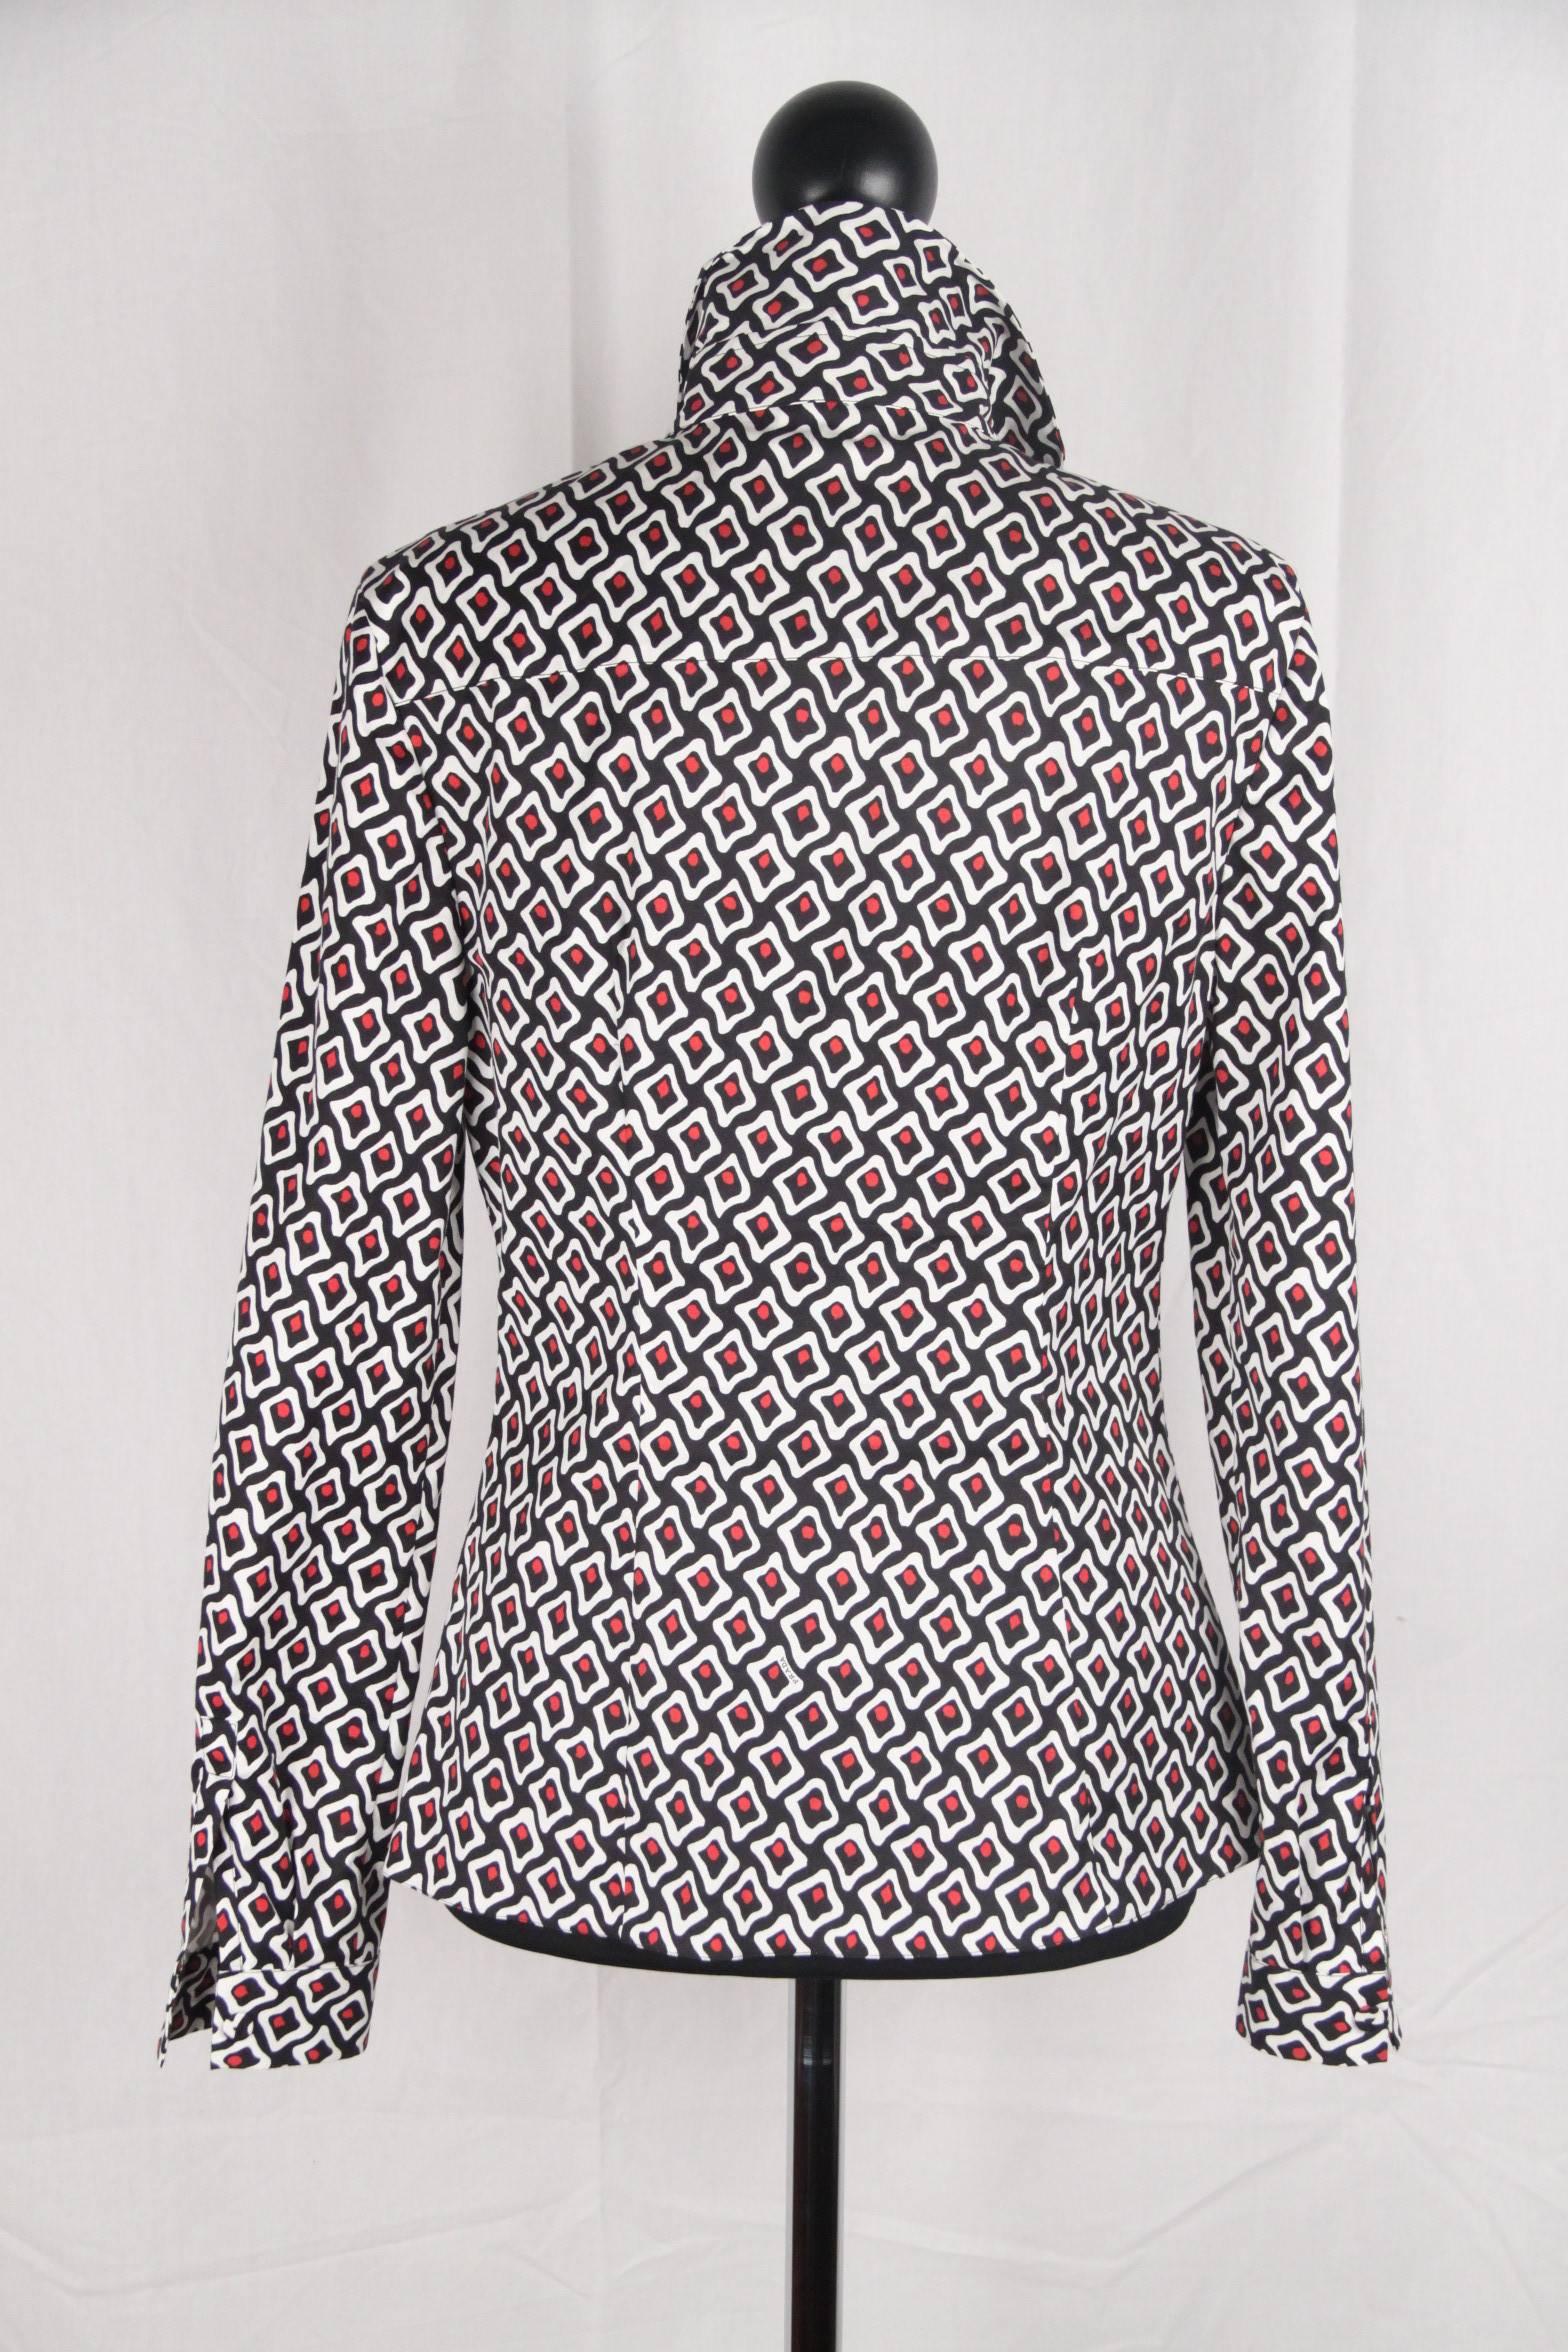 PRADA Geometric Print BUTTON DOWN SHIRT Size 42 In Excellent Condition In Rome, Rome